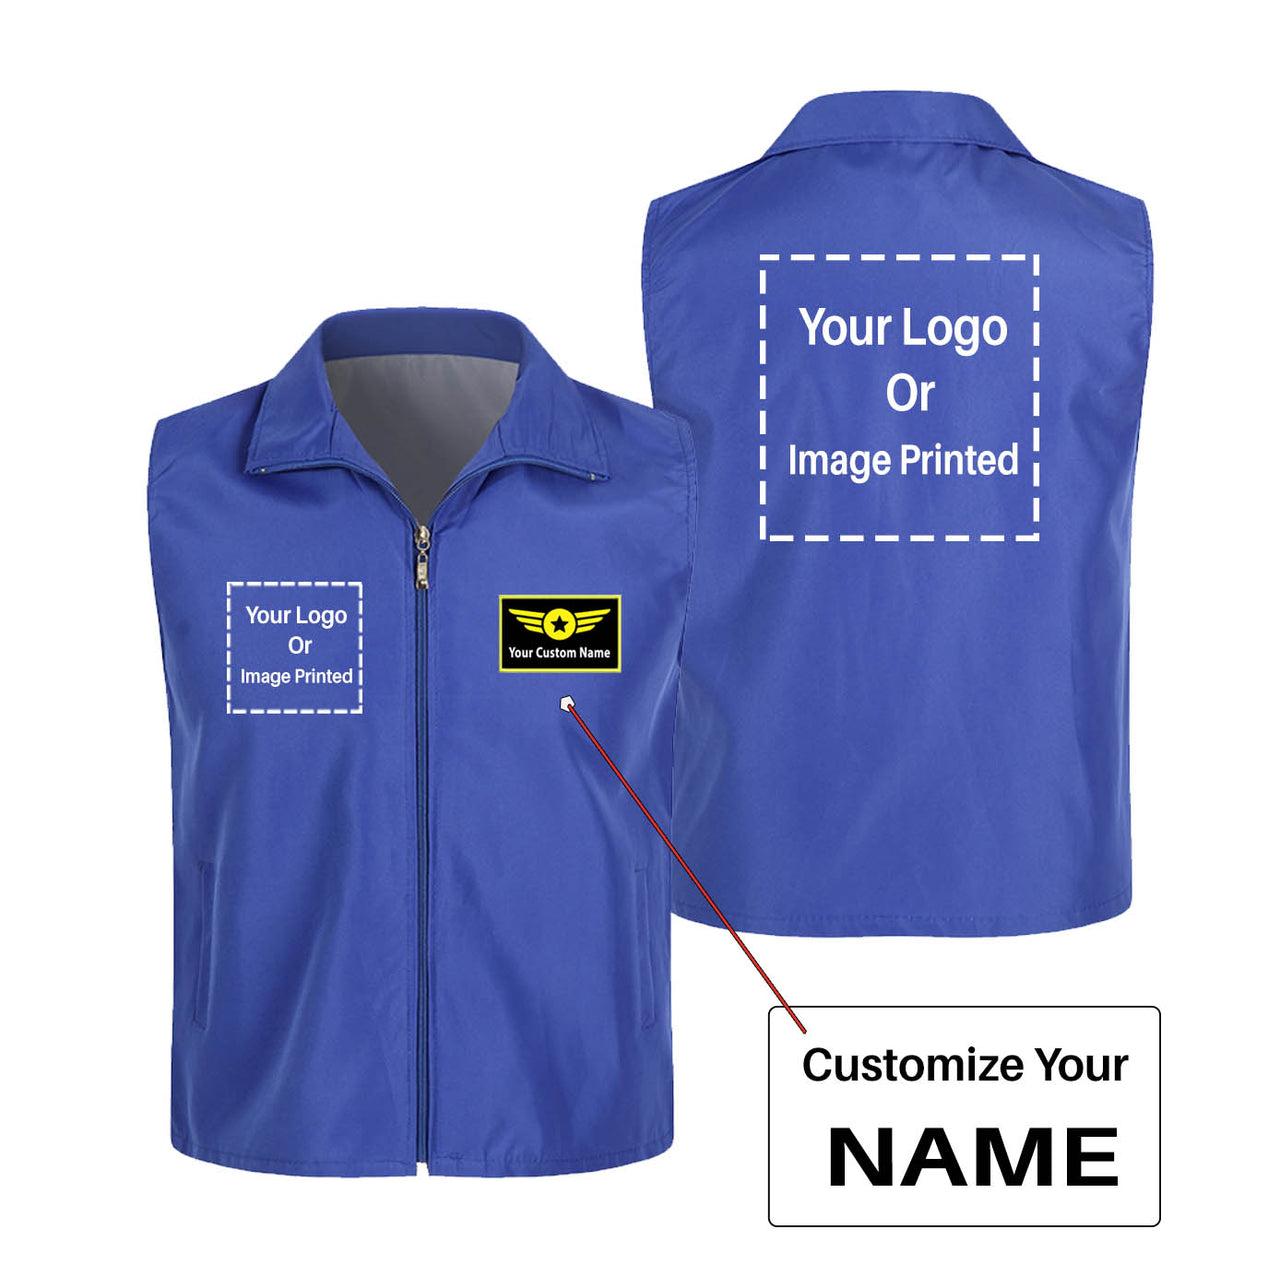 Custom Name with DOUBLE LOGO Designed Thin Style Vests